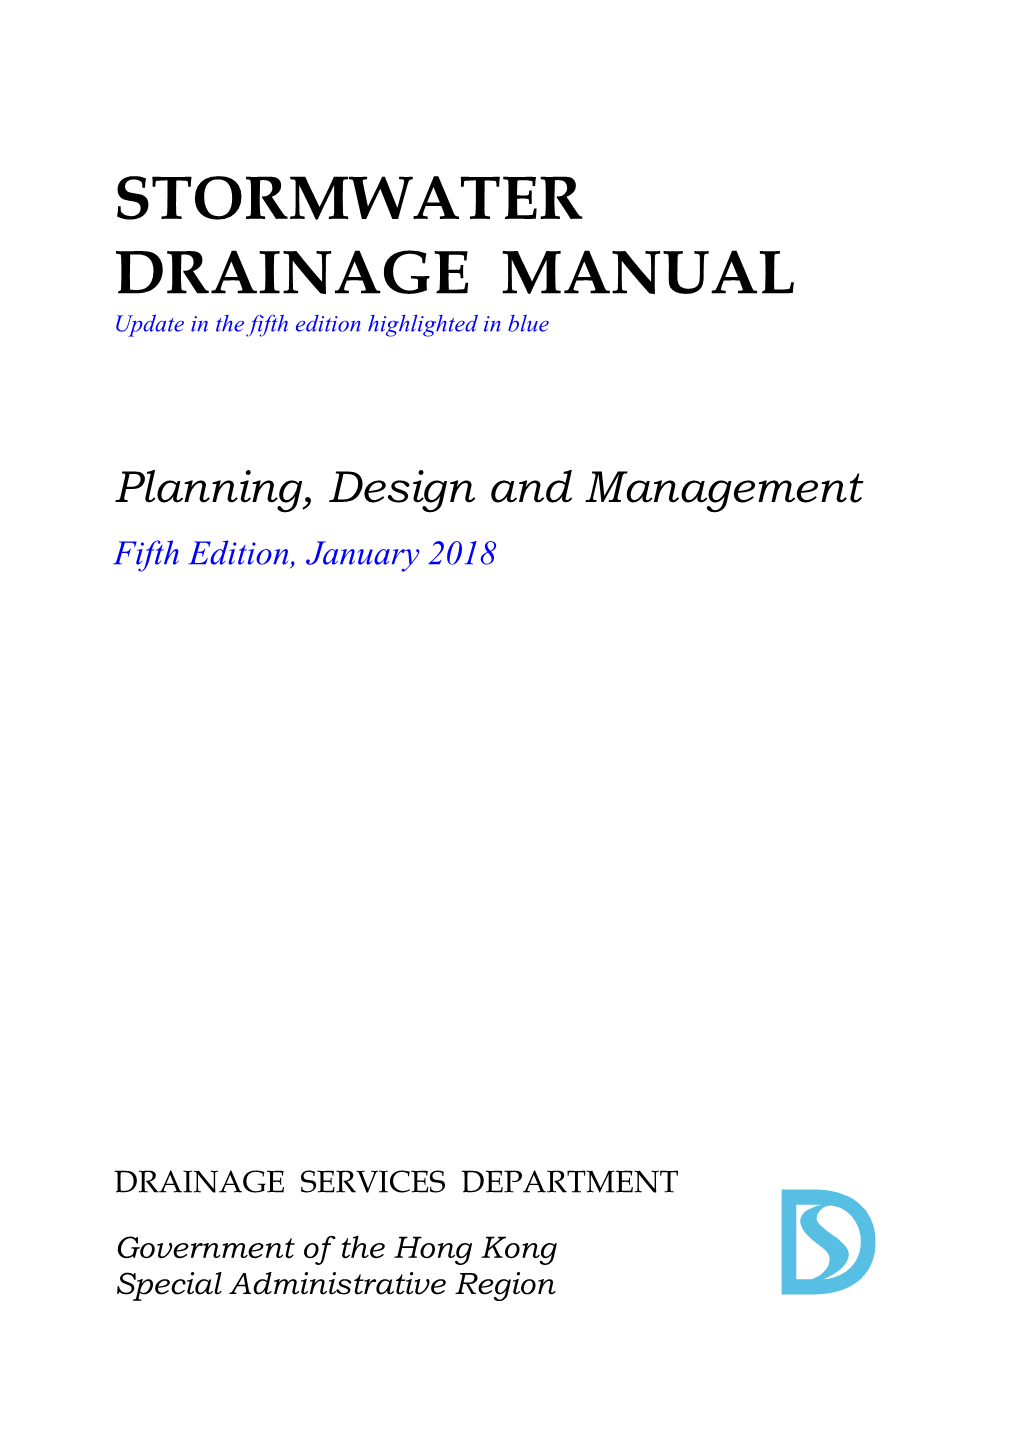 STORMWATER DRAINAGE MANUAL Update in the Fifth Edition Highlighted in Blue